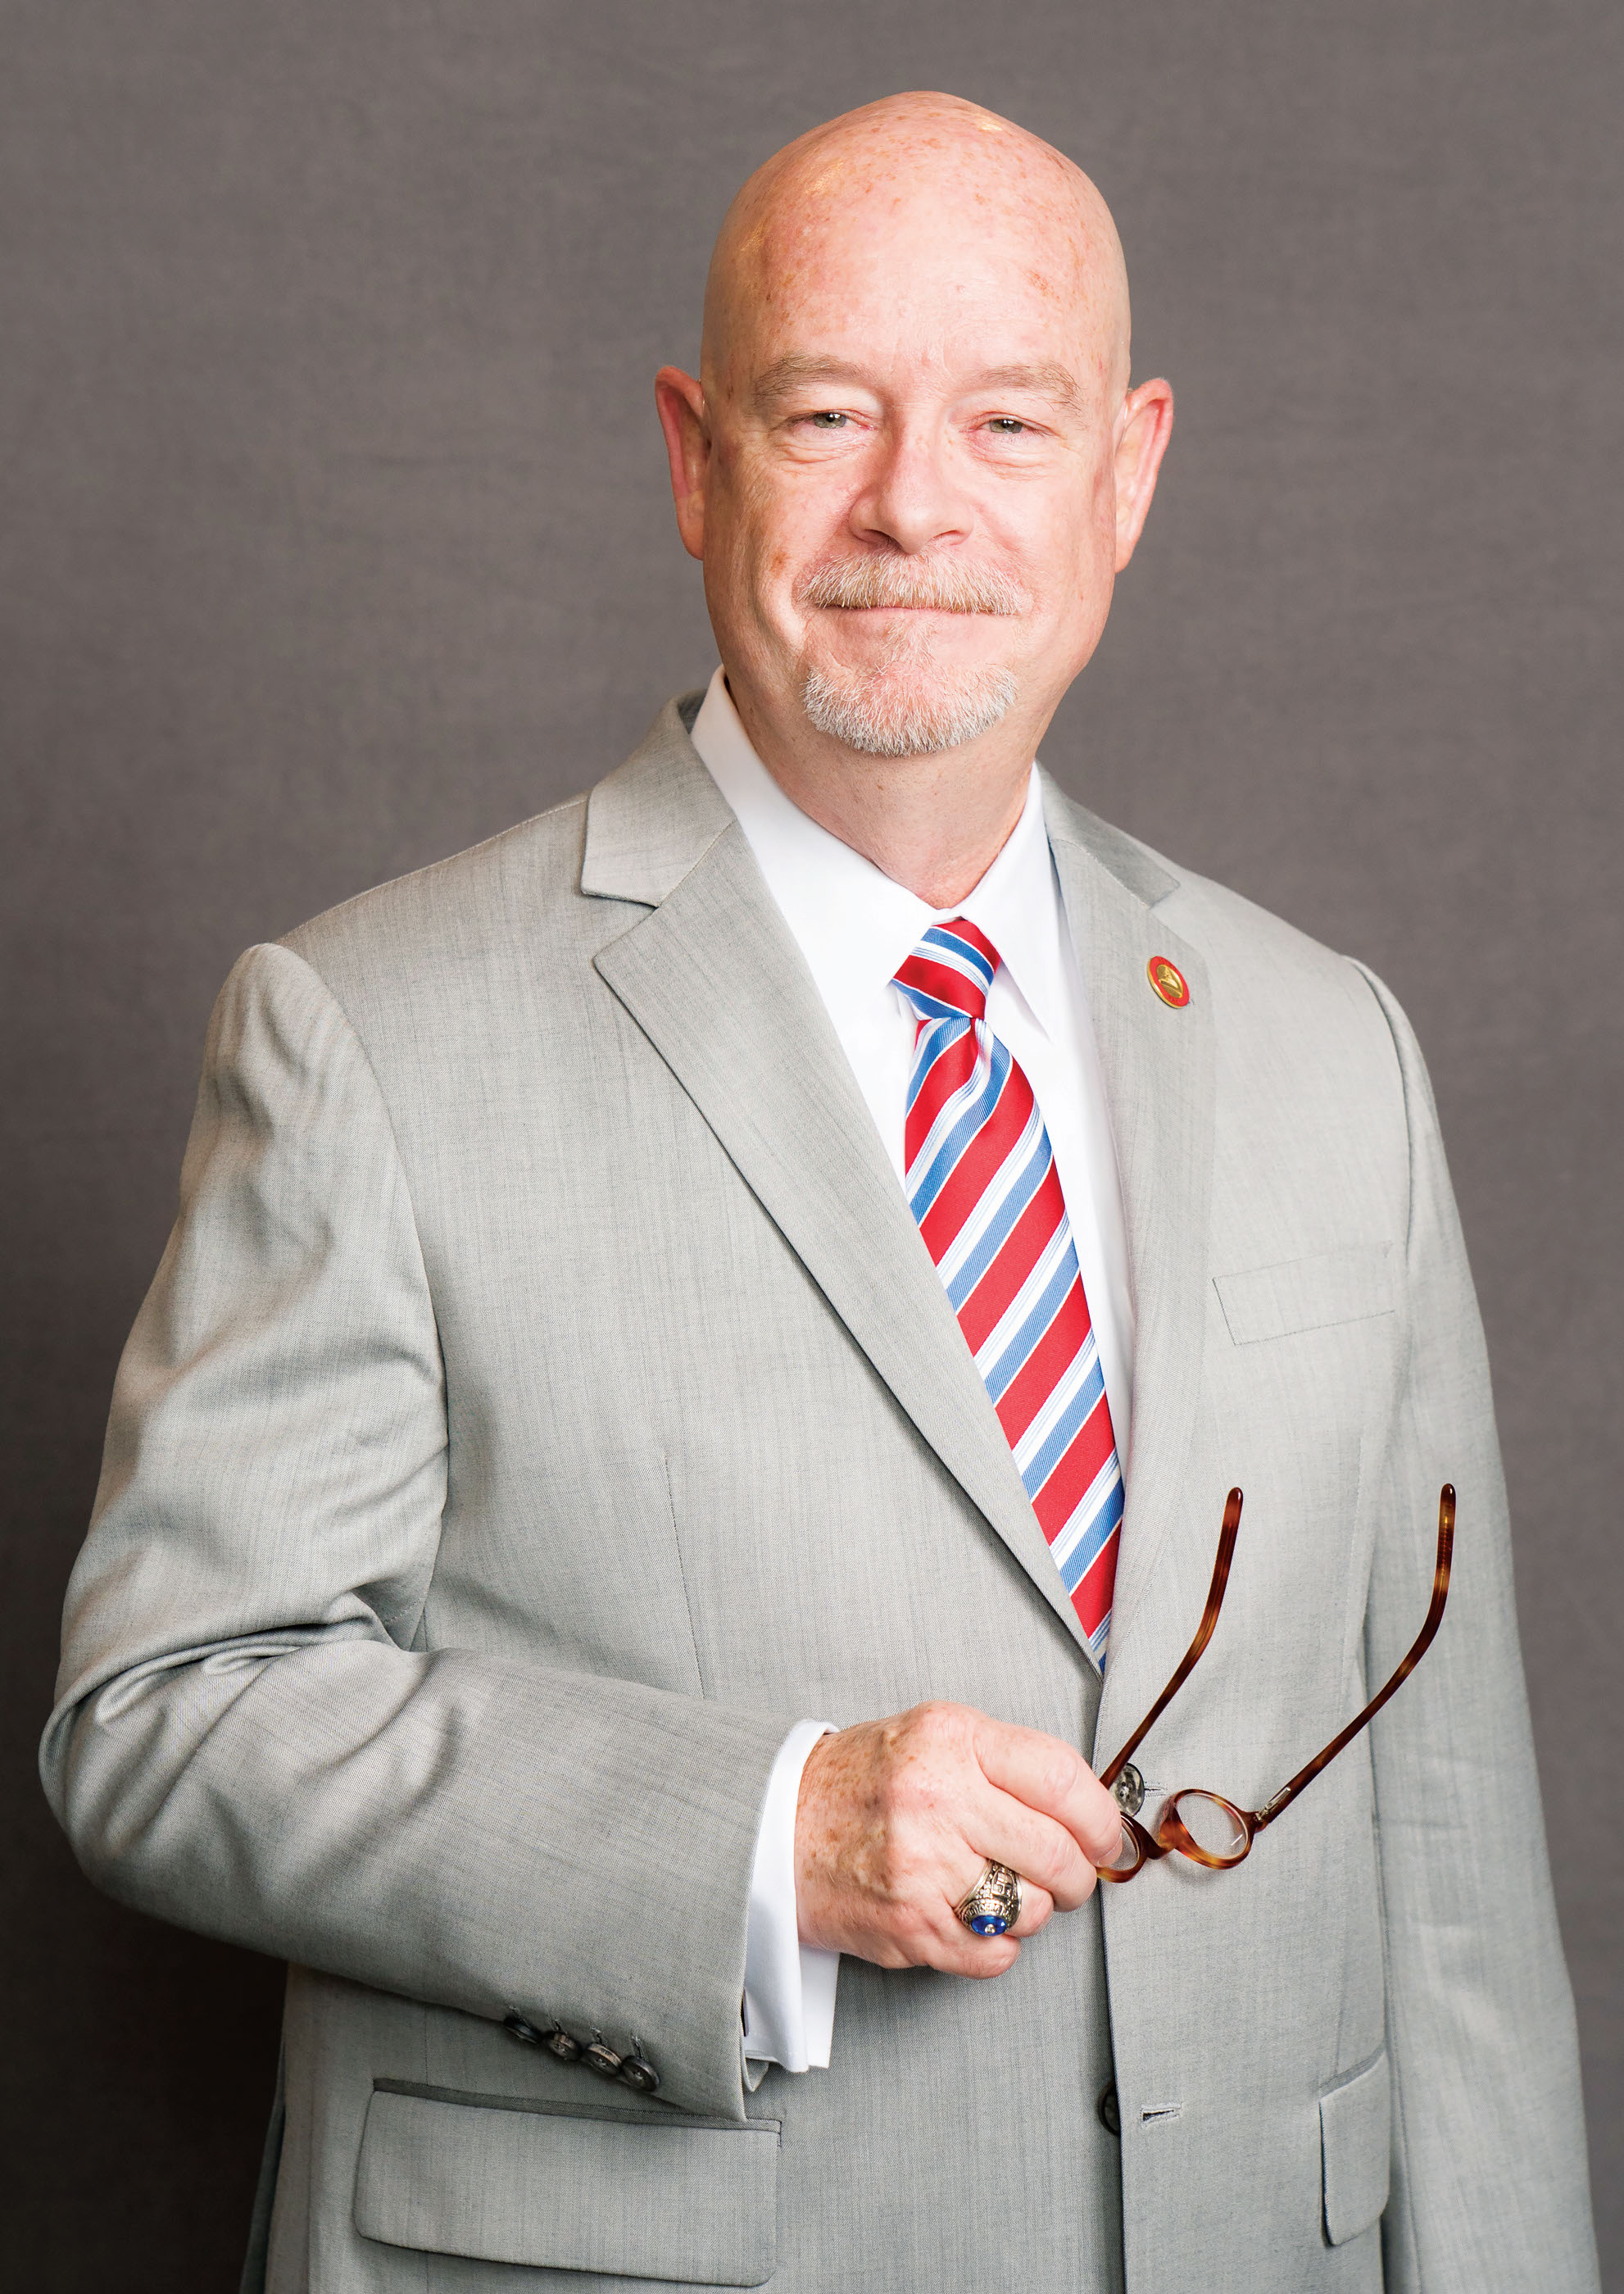 Thomas J. Eichler, MD, FASTRO, is the American Society for Radiation Oncology president.